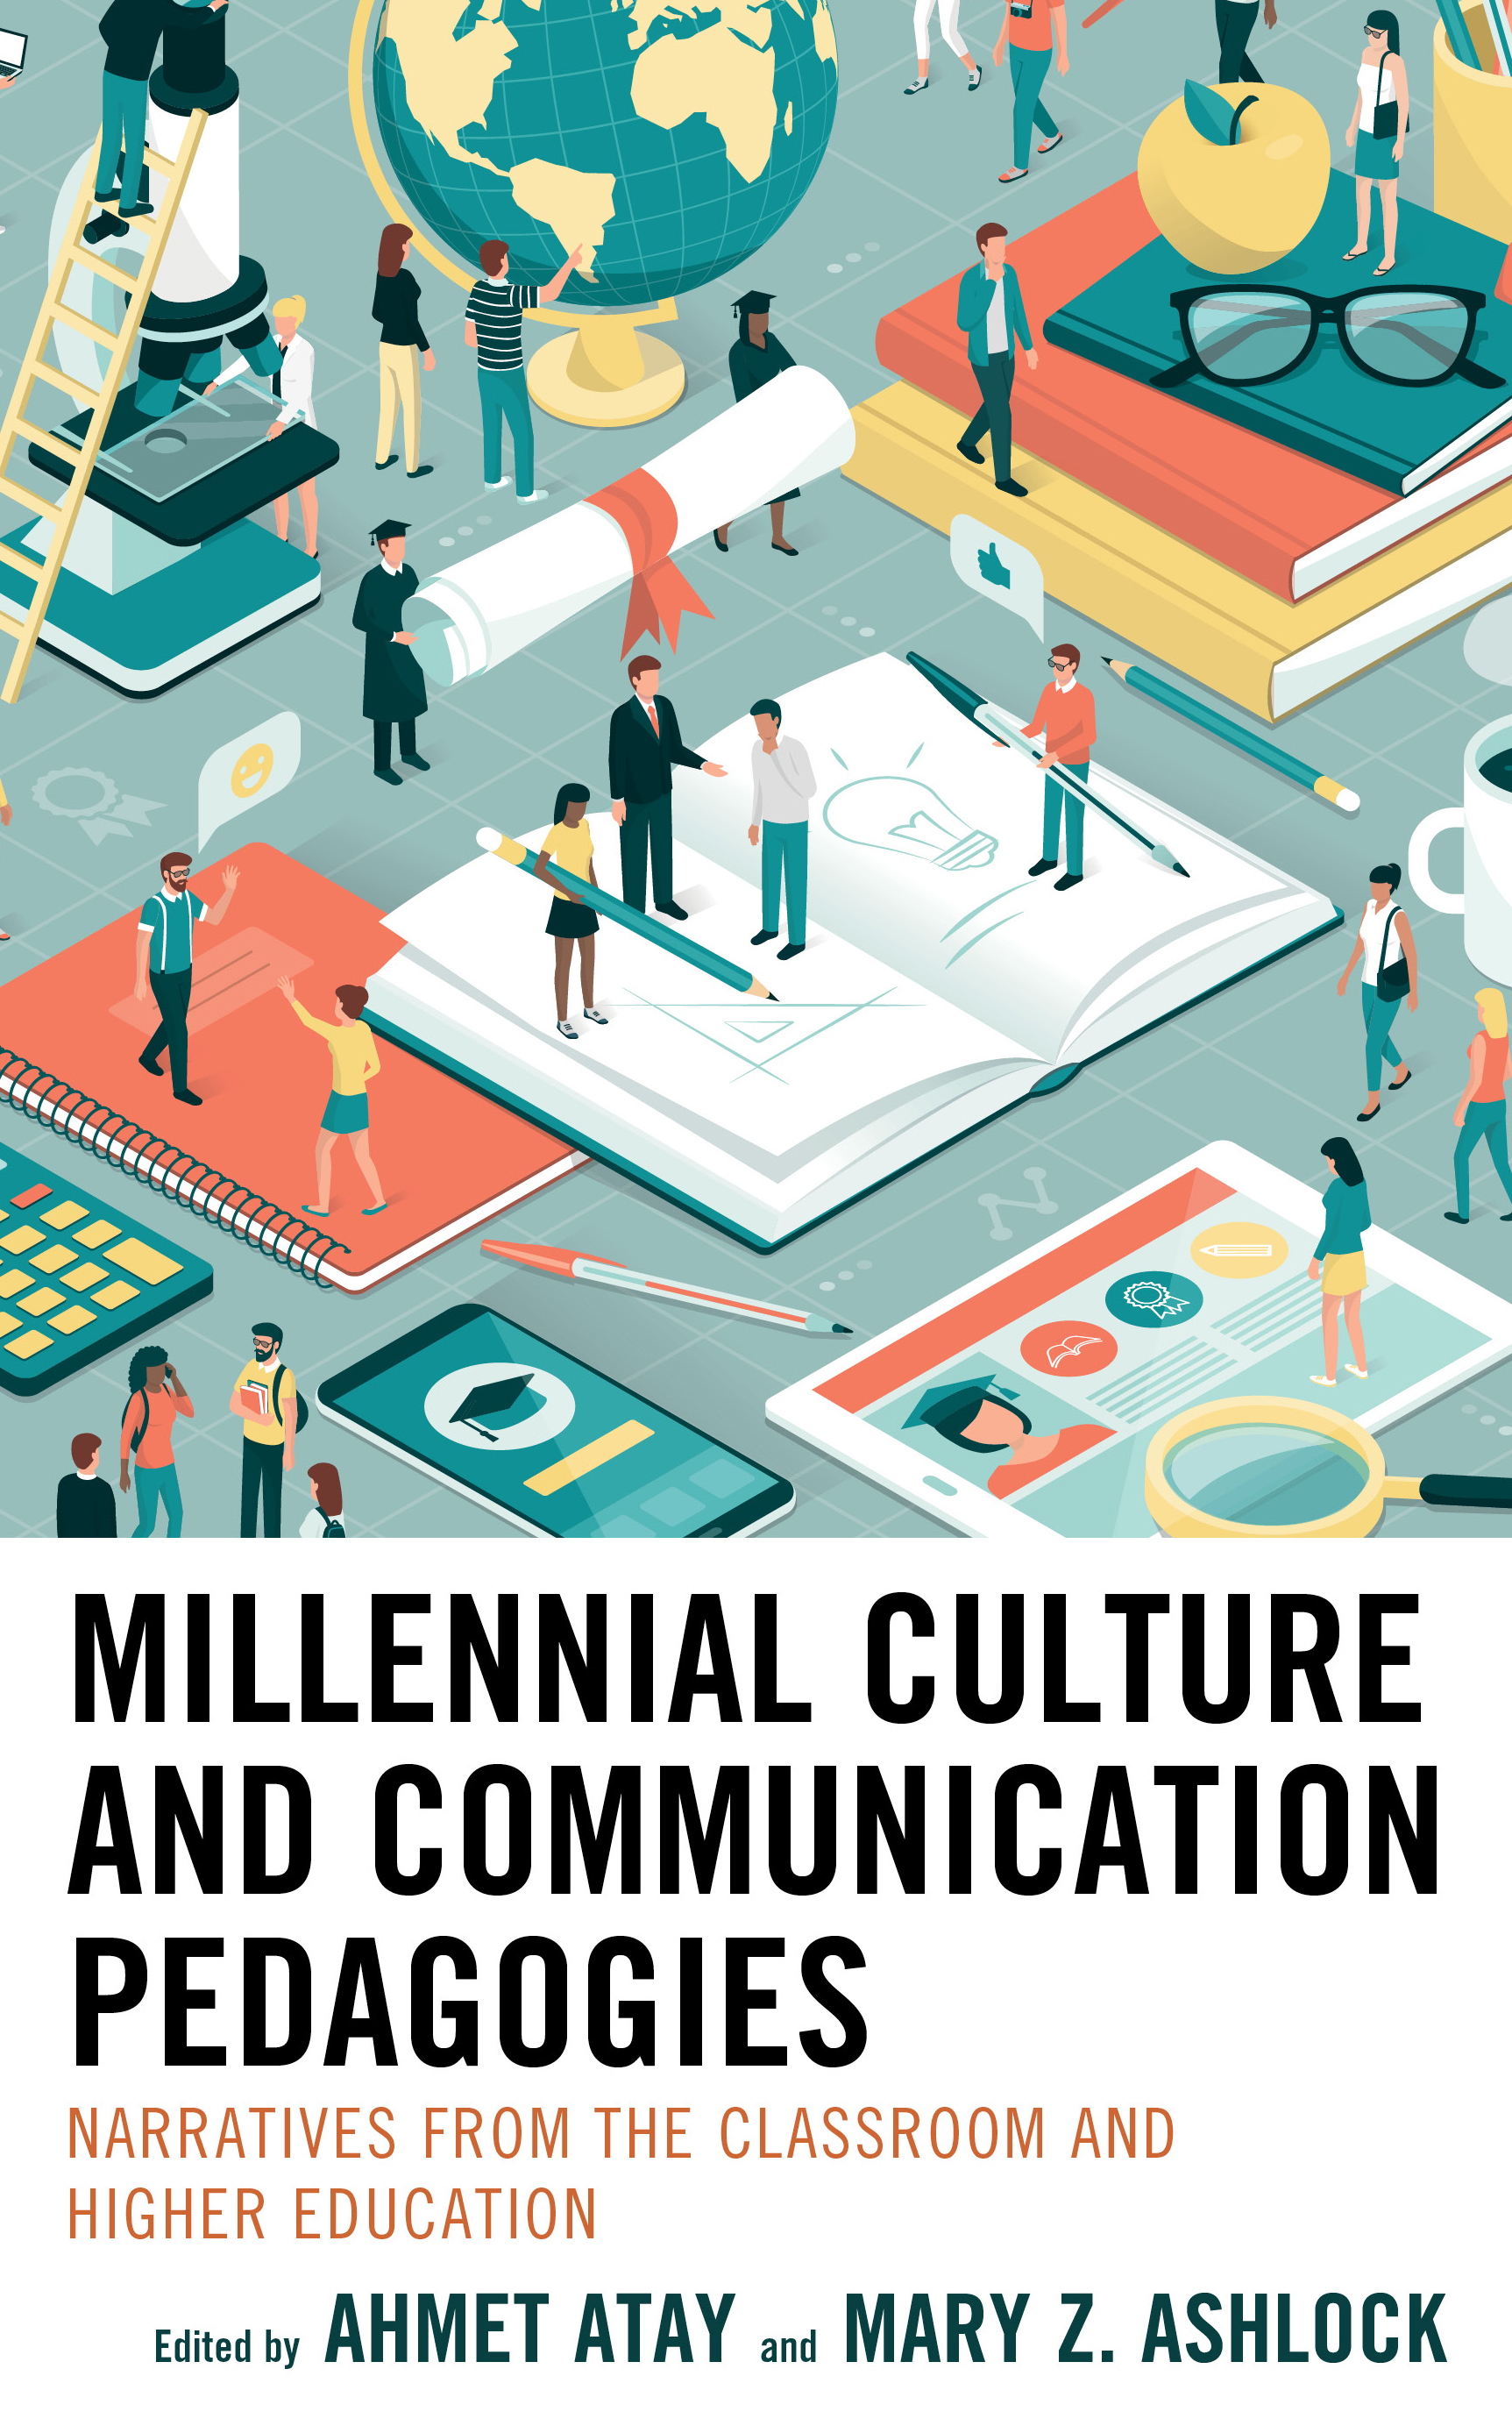 Millennial Culture and Communication Pedagogies: Narratives from the Classroom and Higher Education